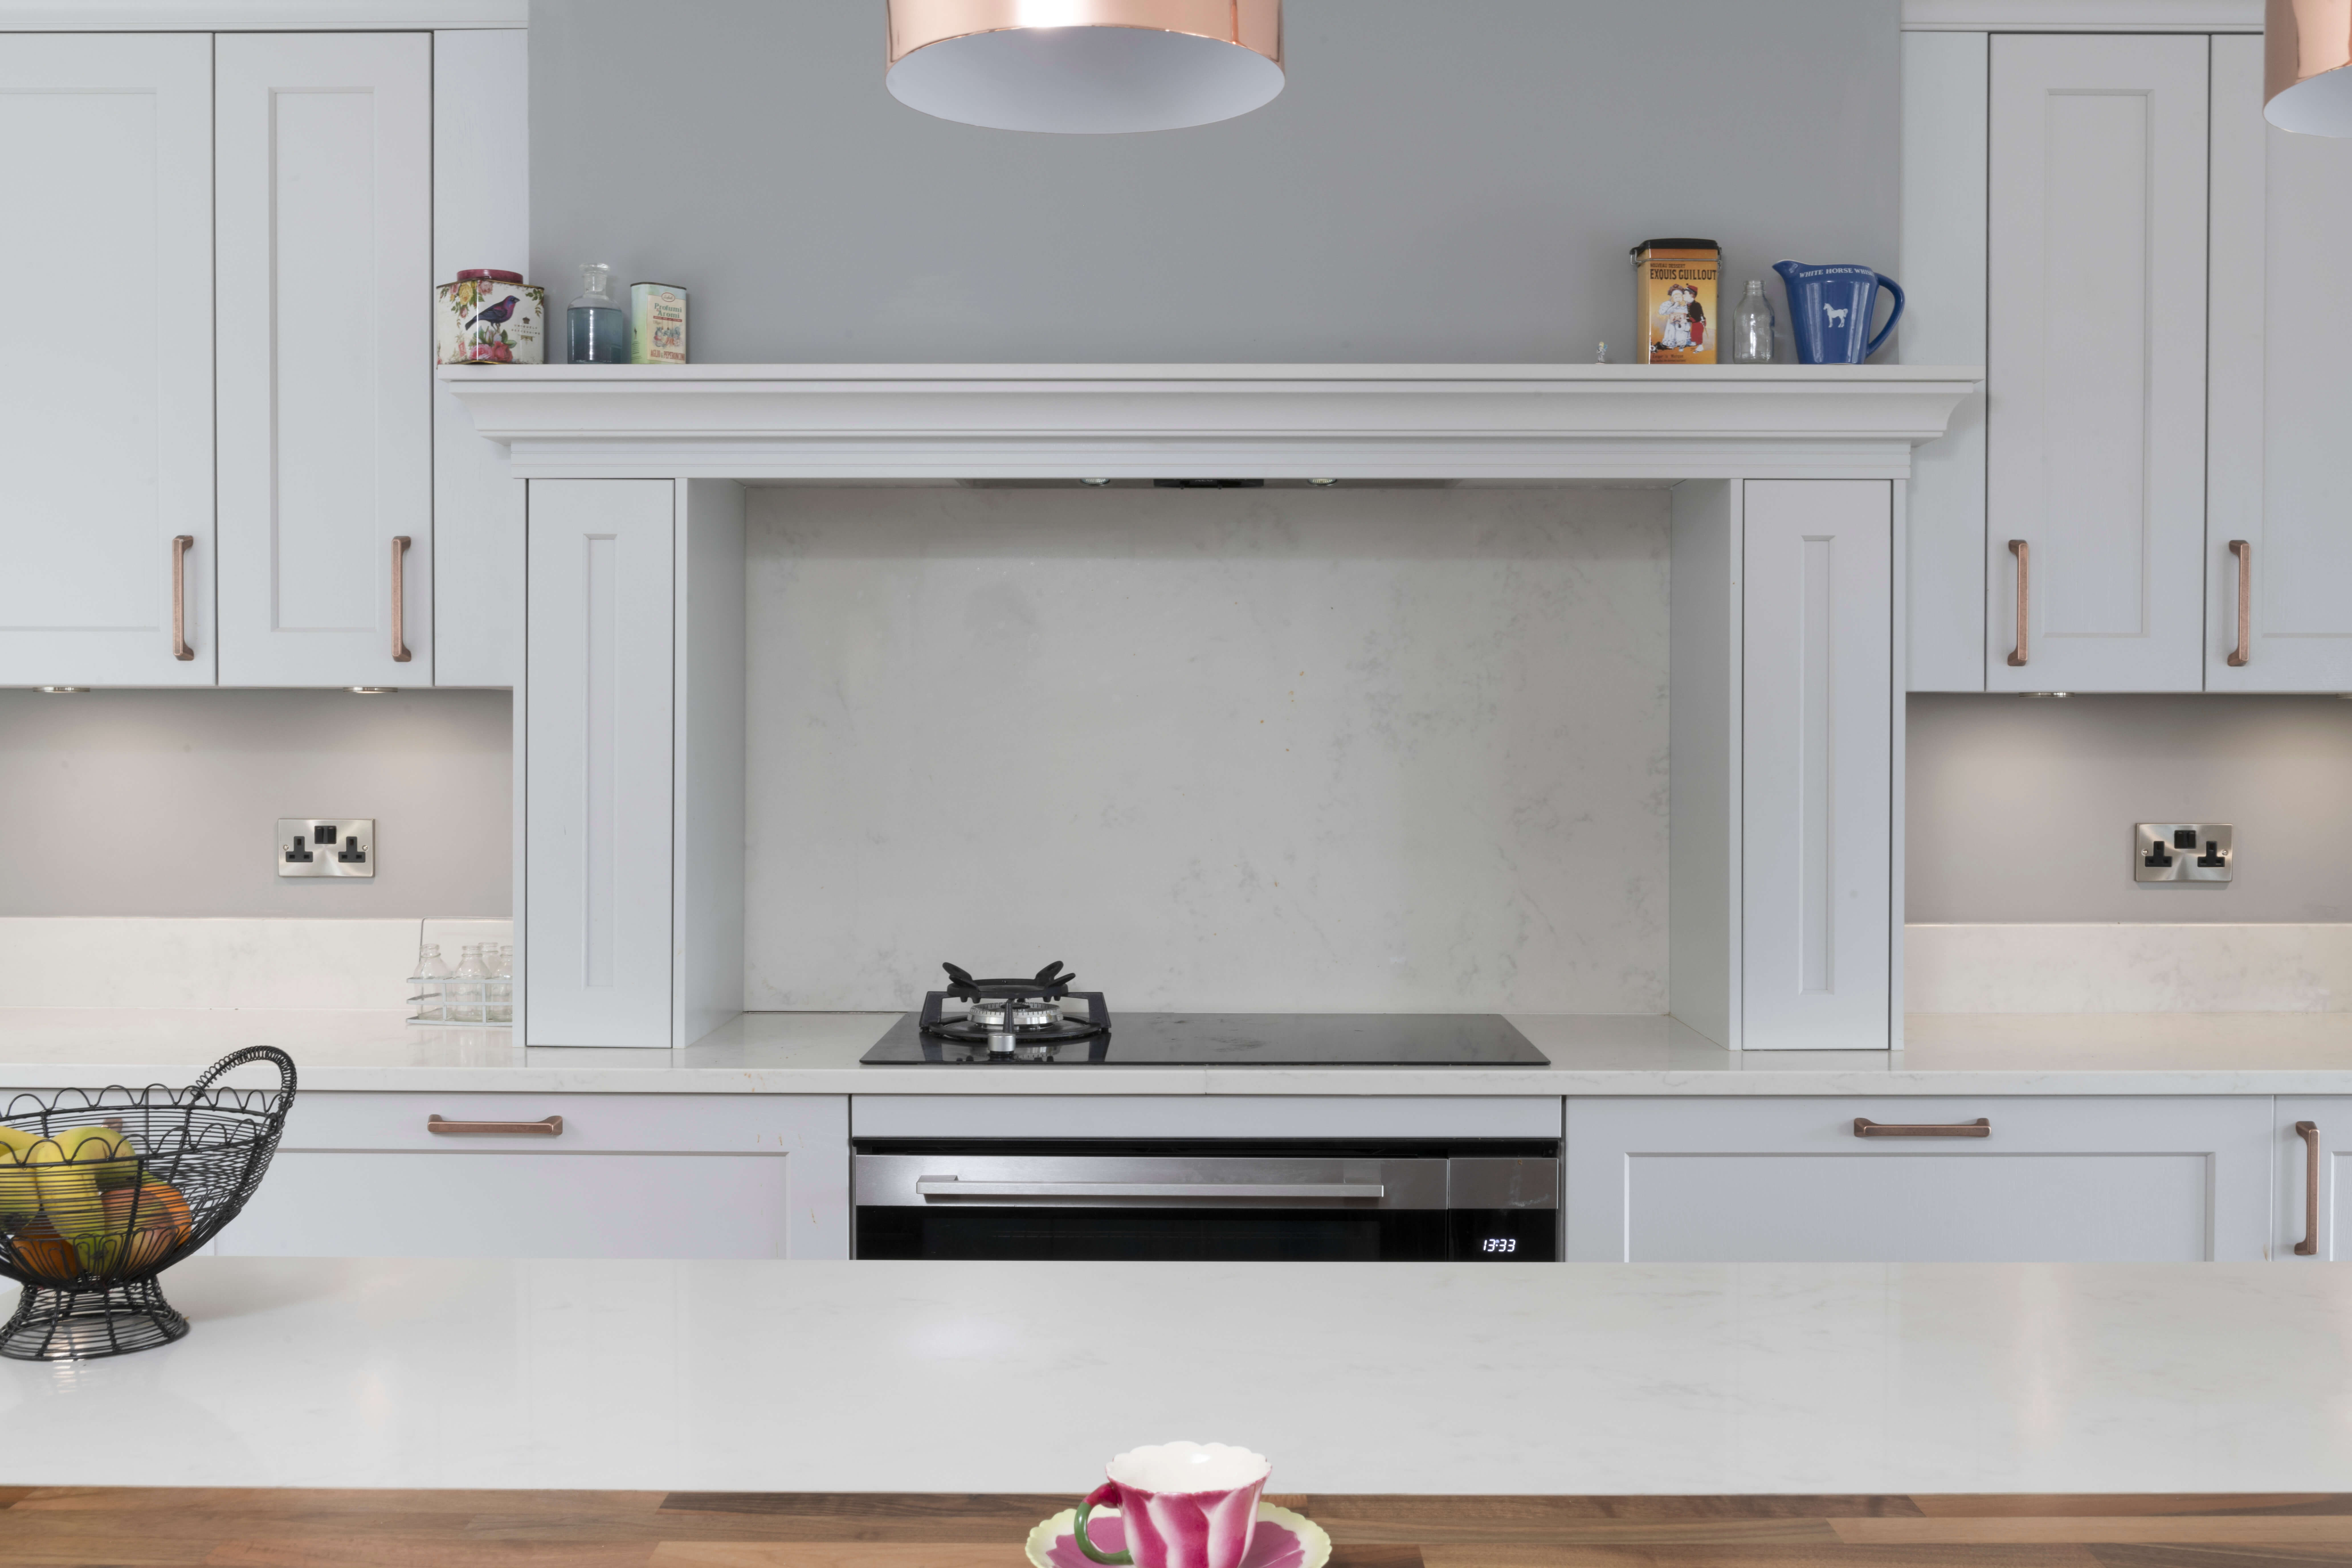 A pale grey kitchen is complemented by copper accessories